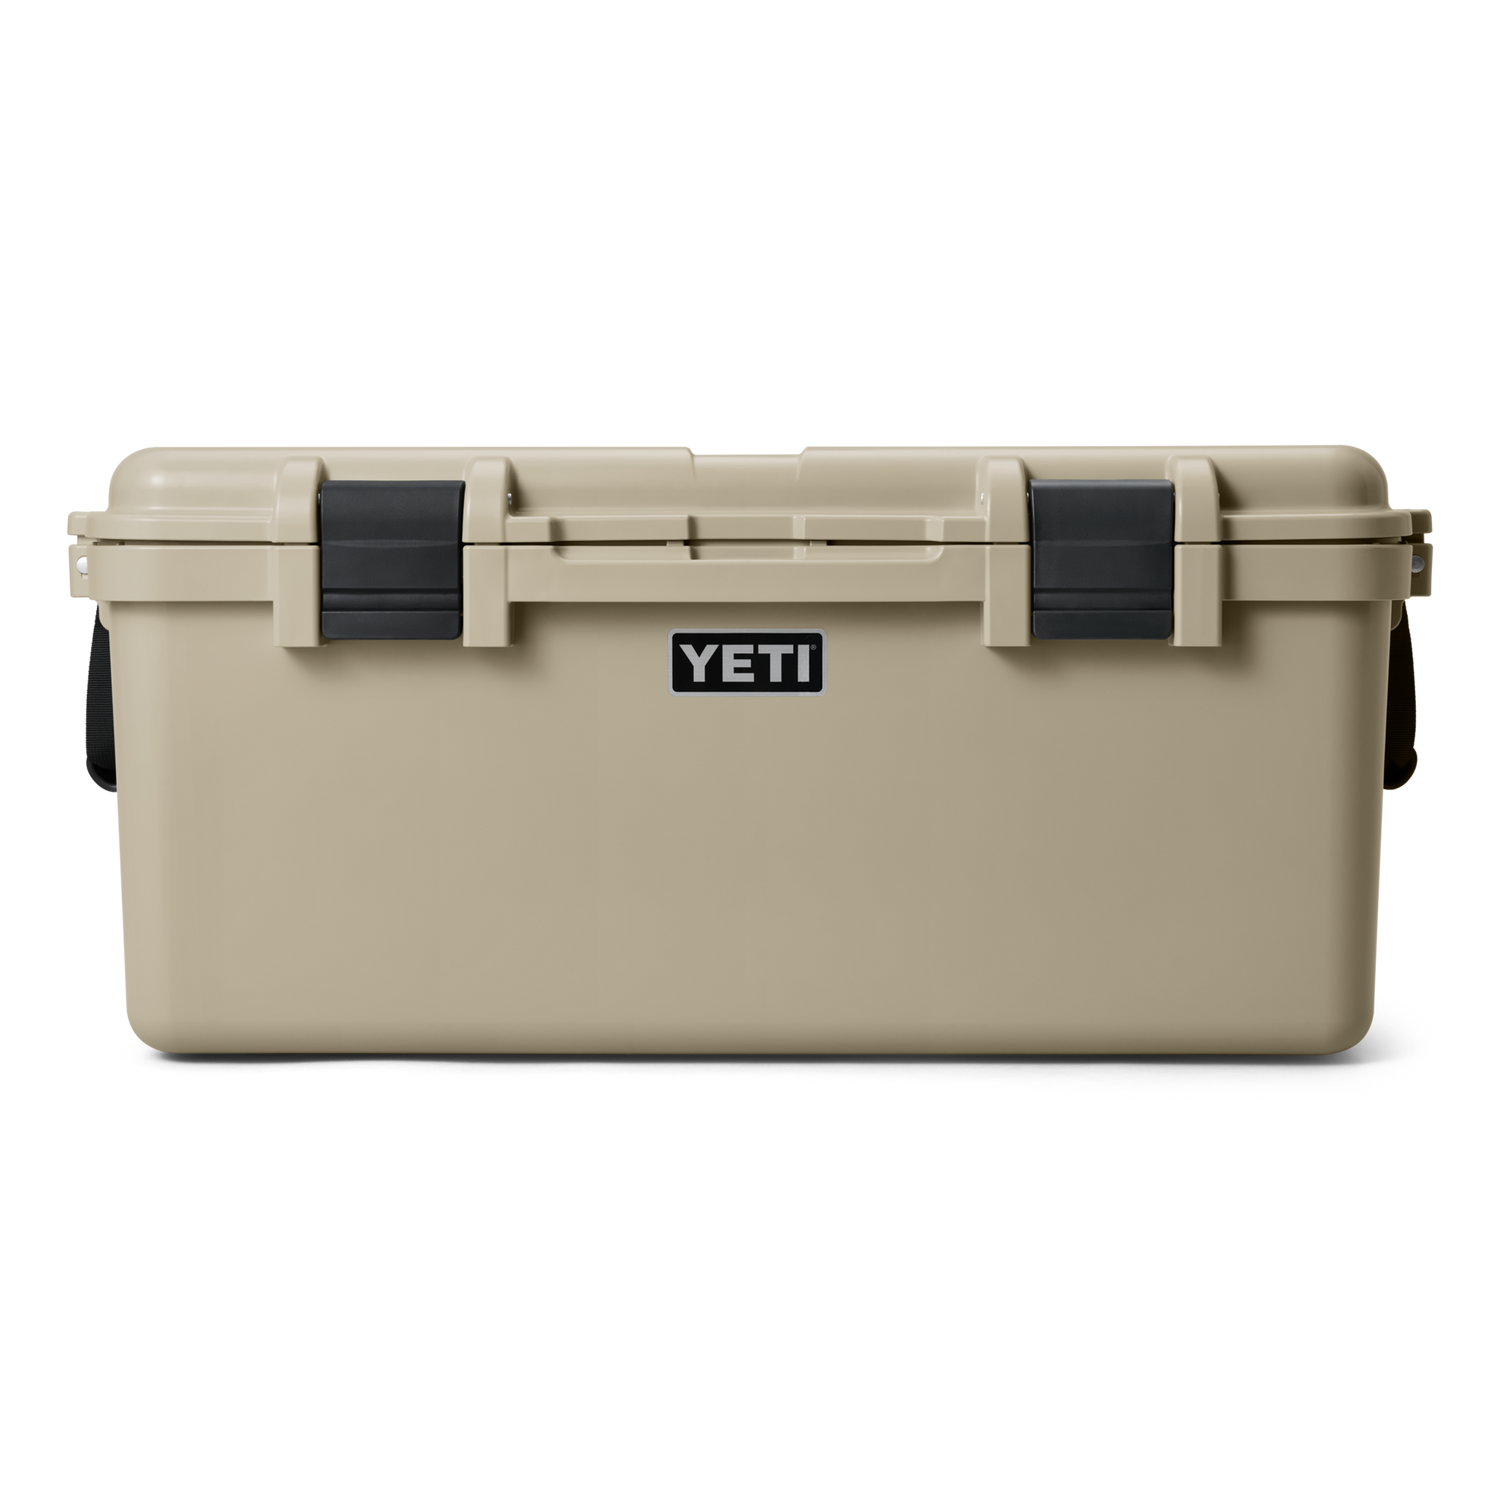 Yeti LoadOut Bucket and Accessories - The Ultimate Cargo Hauler